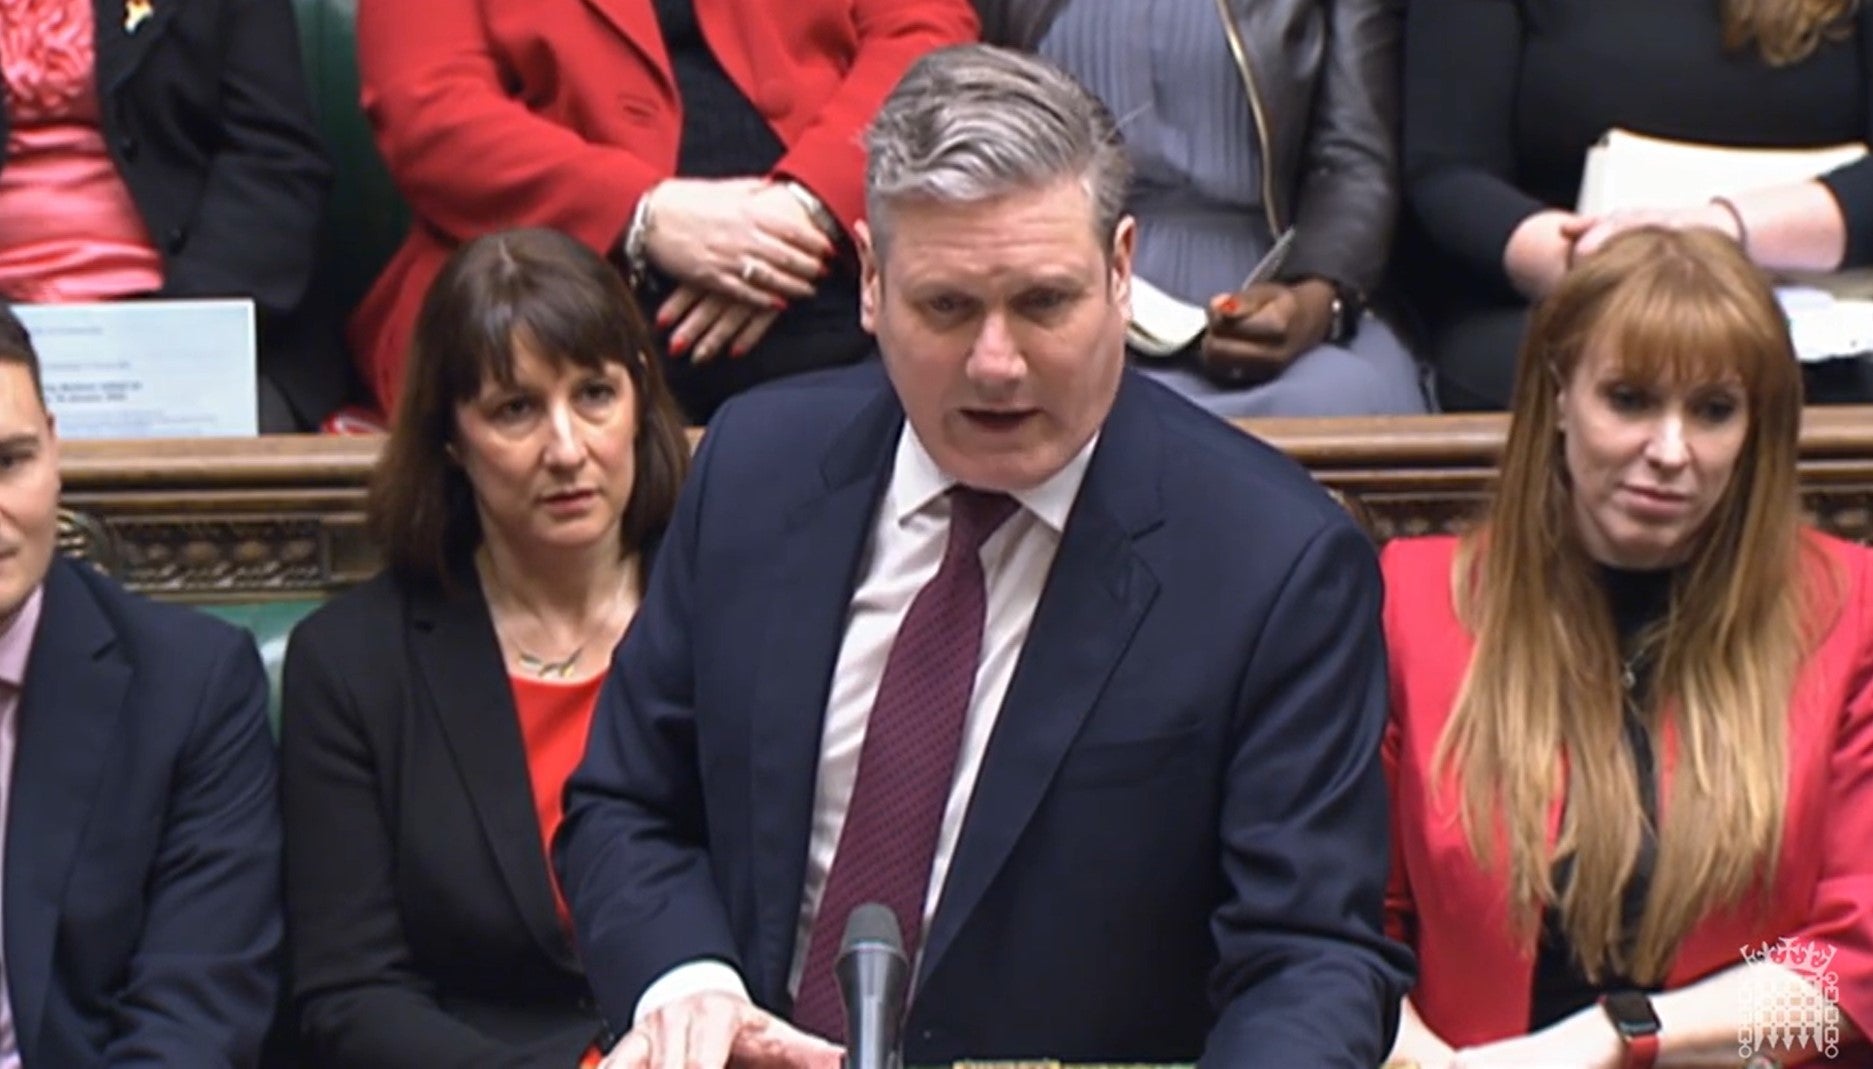 Starmer ended up by asking a good, if rhetorical, question